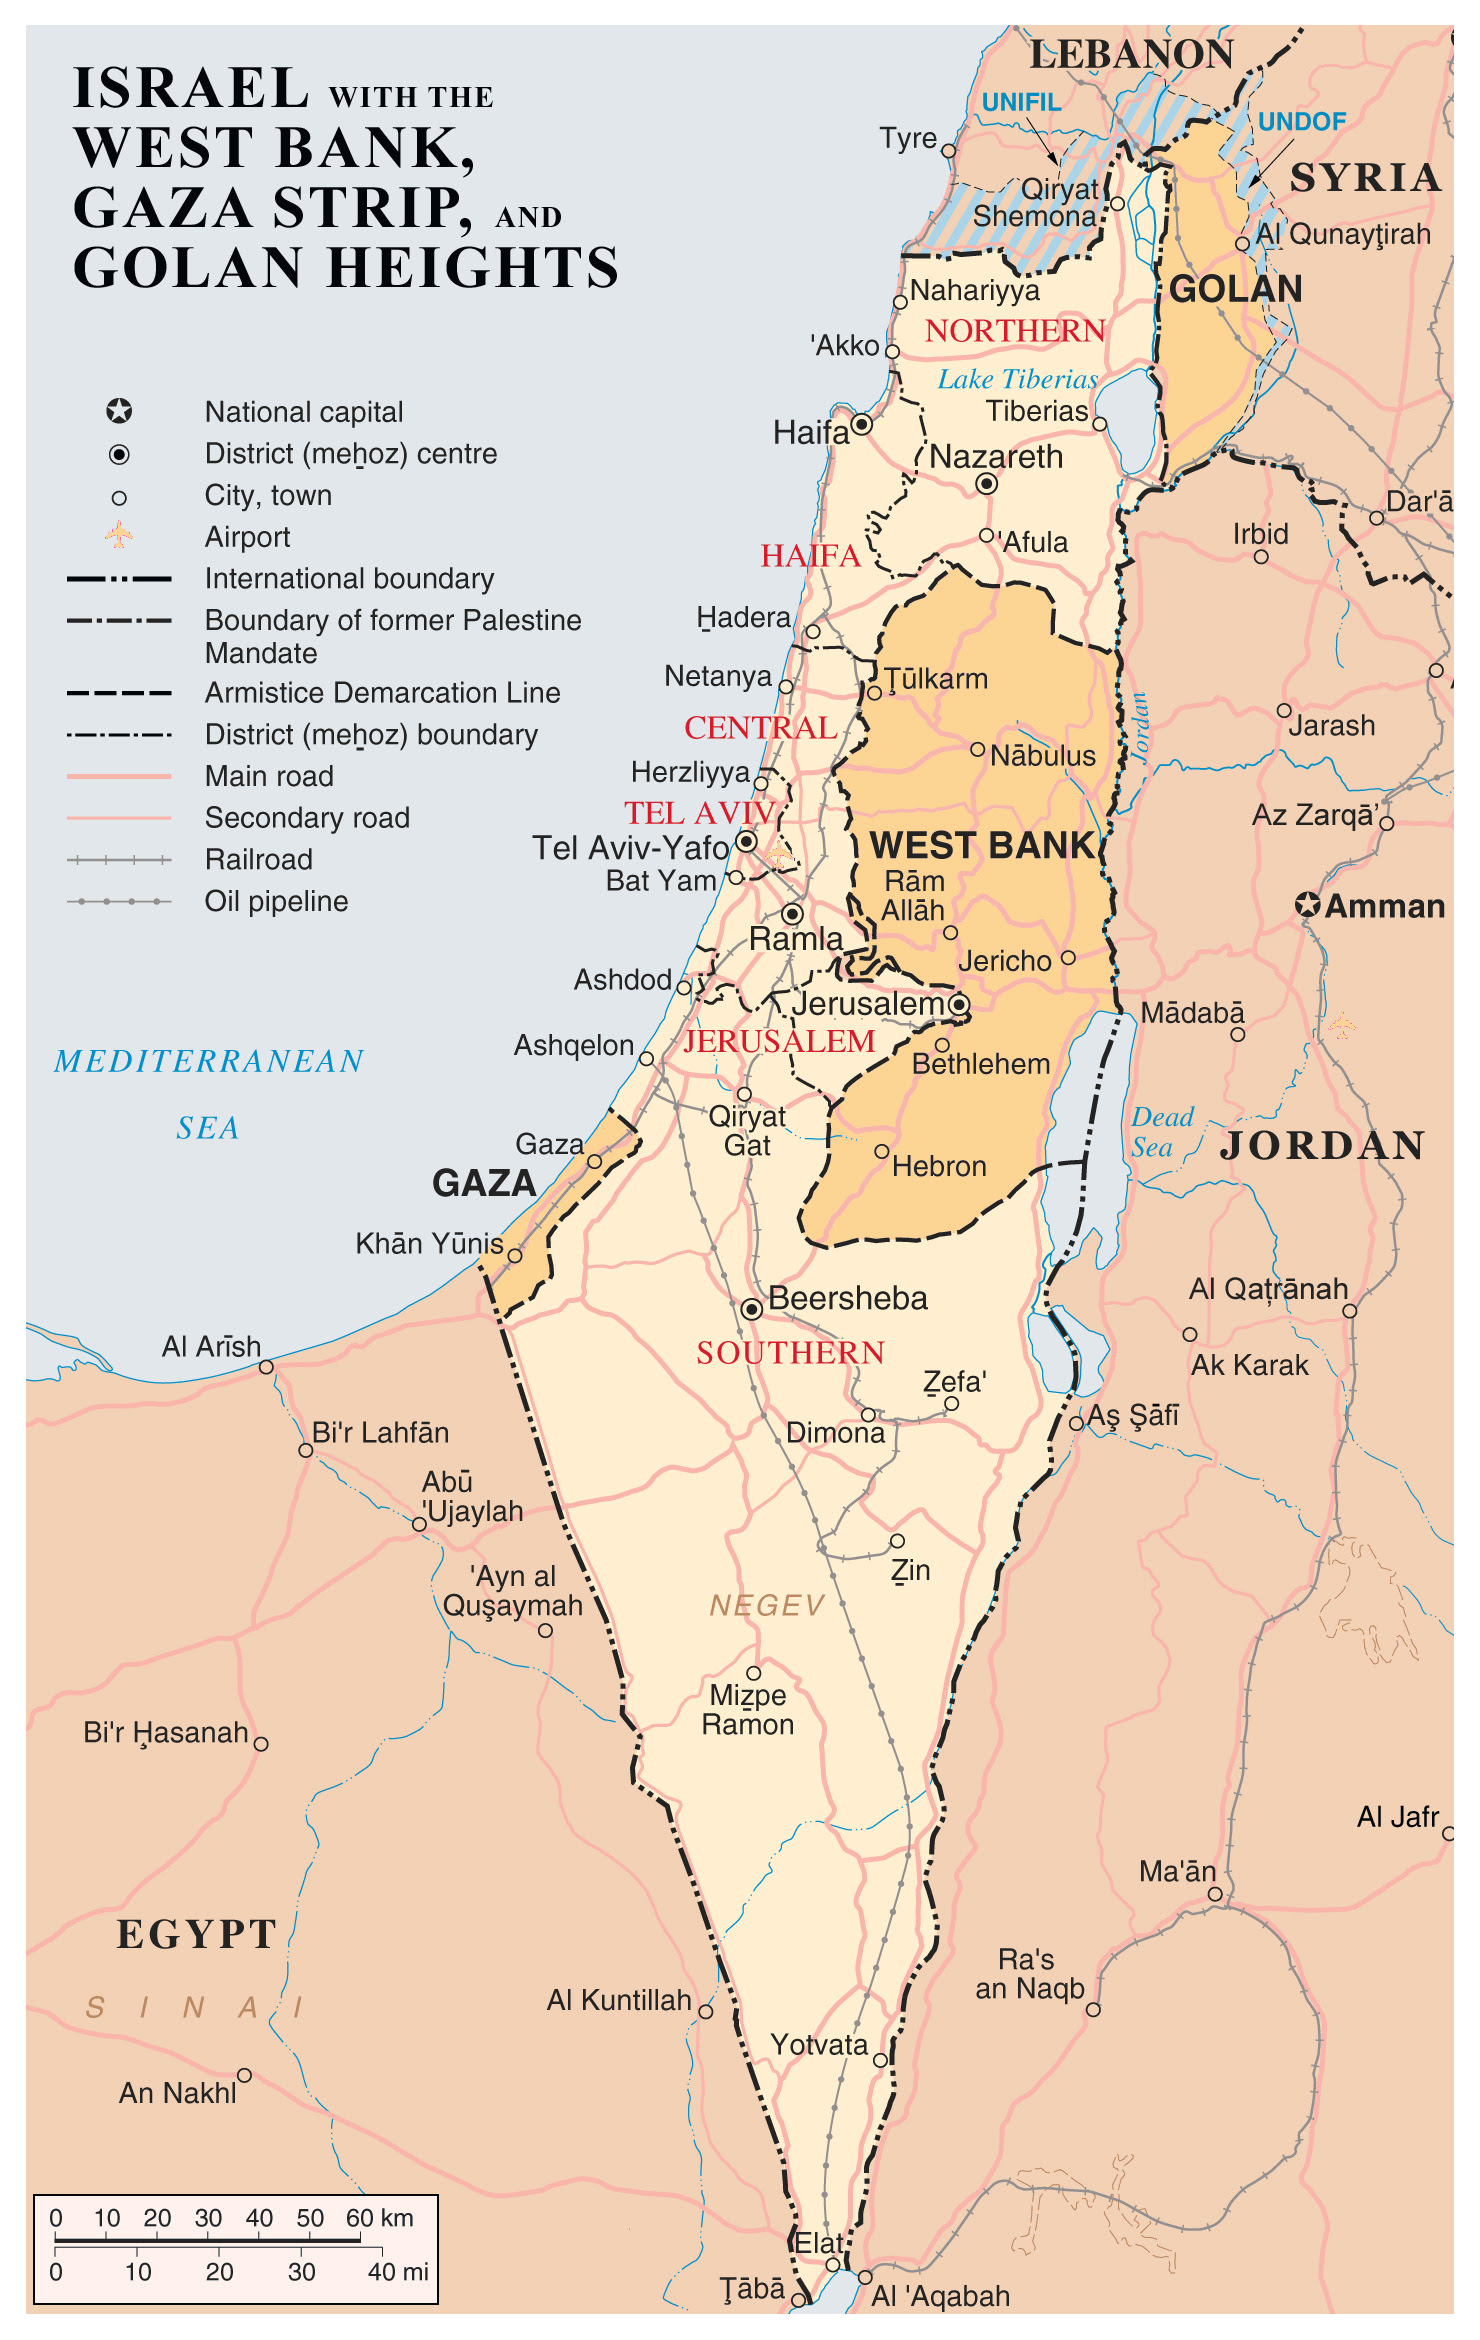 The designations employed and the presentation of material on this map do not imply the expression of any opinion whatsoever on the part of the secretariat of the united nations concerning the legal status of any country, territory, city or area or of. Large Detailed Map Of Israel With The West Bank Gaza Strip And Golgan Heights Vidiani Com Maps Of All Countries In One Place